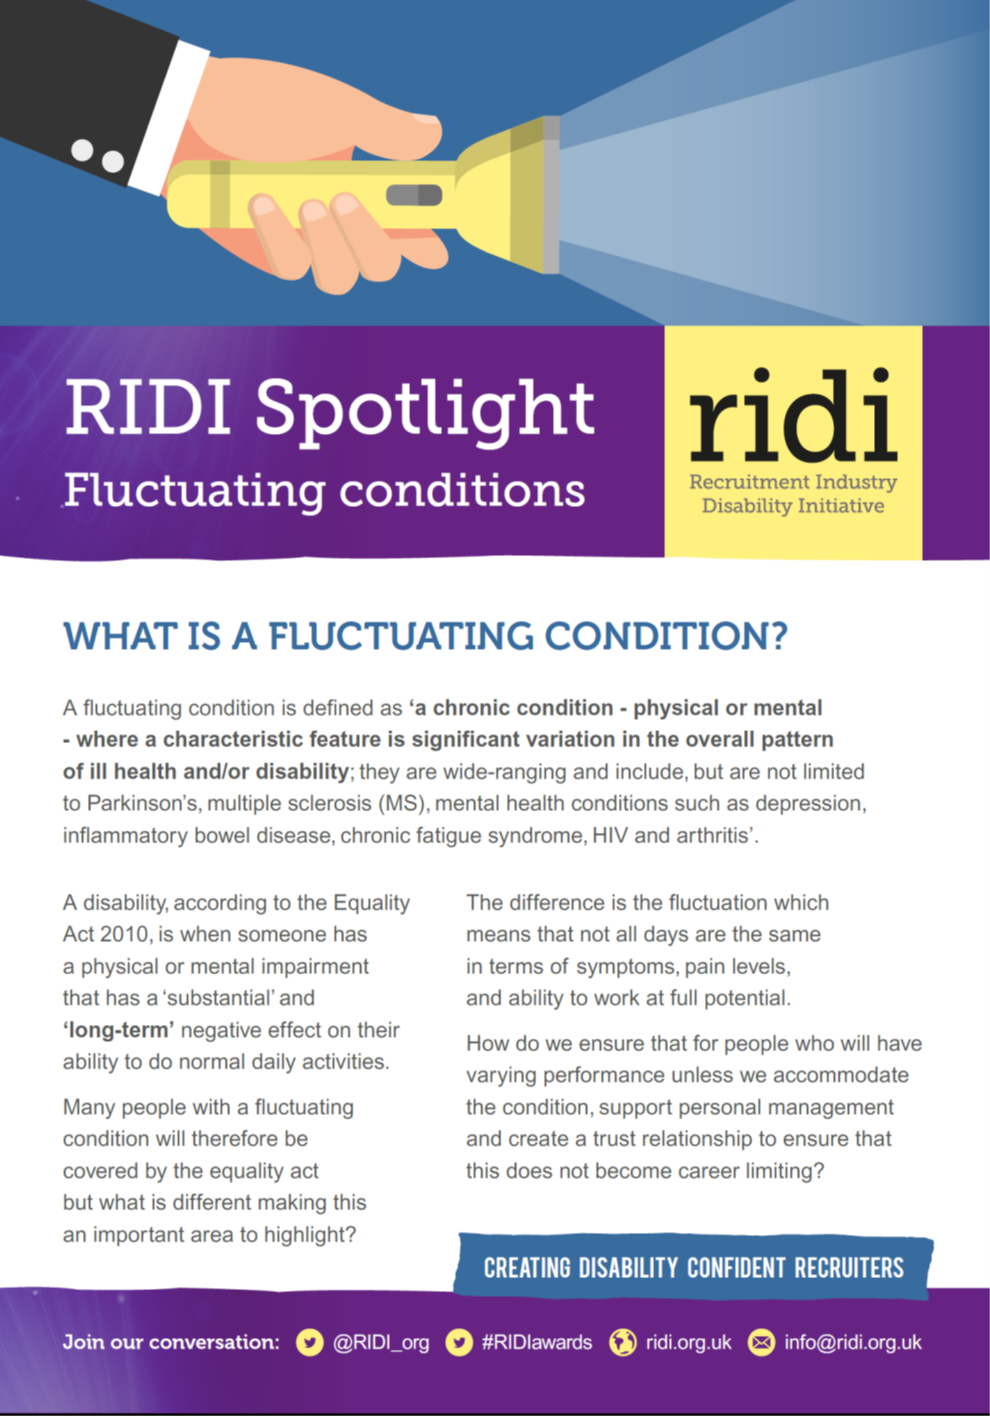 RIDI Spotlight - The Impact of Fluctuating Conditions